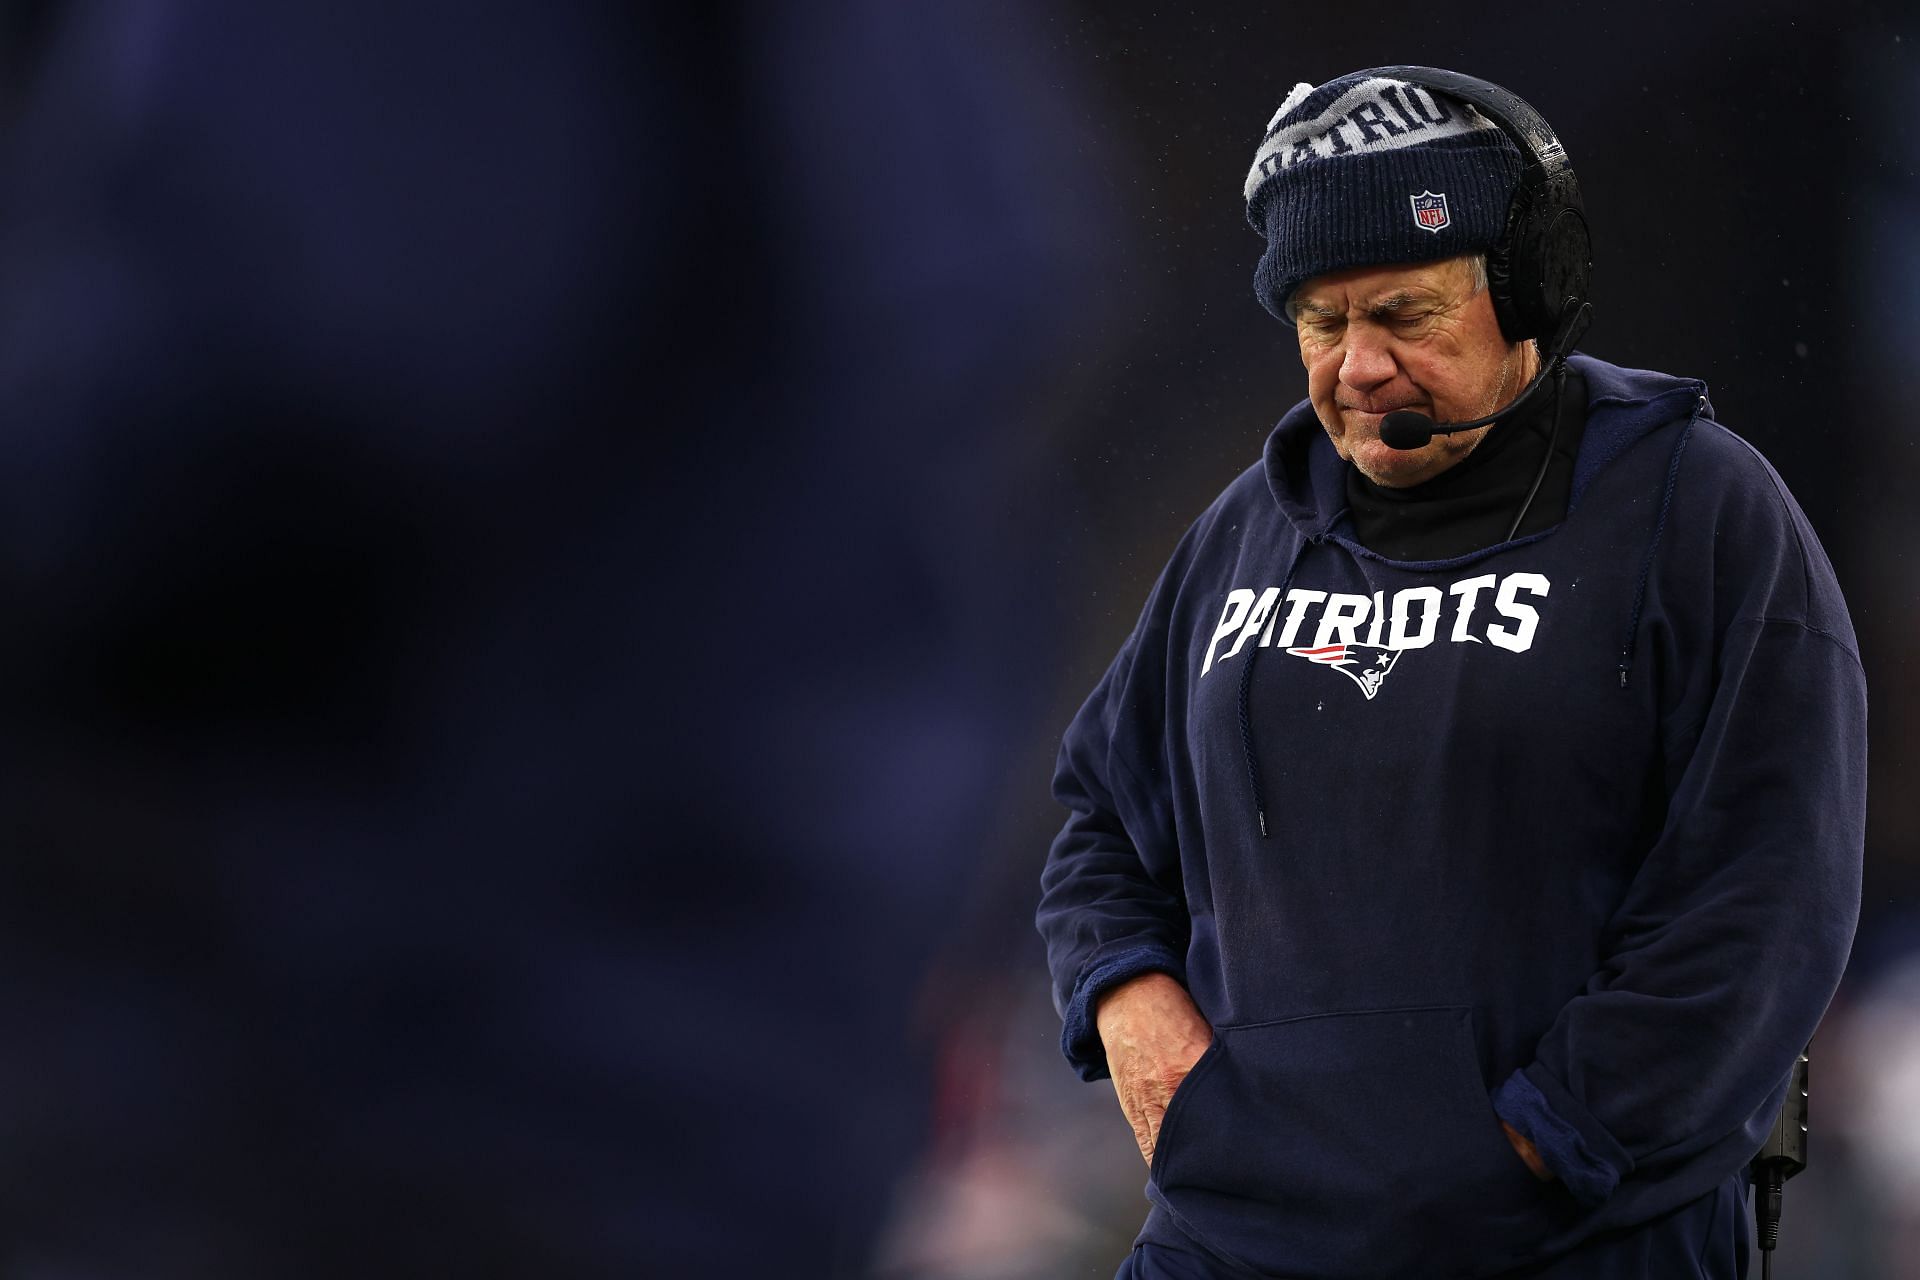 Bill Belichick: Los Angeles Chargers v New England Patriots